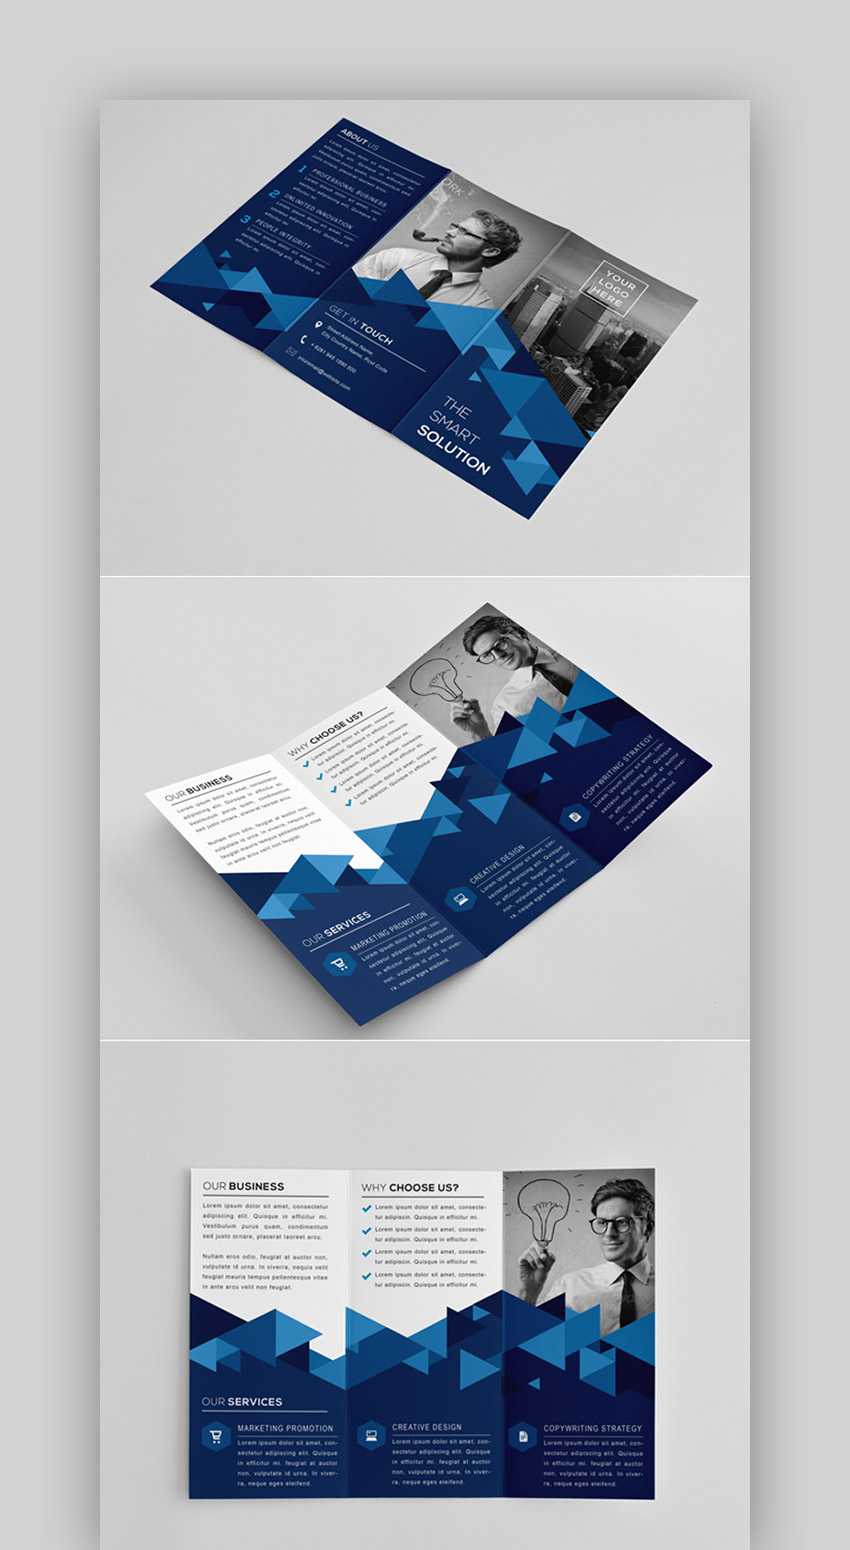 35 Best Indesign Brochure Templates – Creative Business Pertaining To Brochure Templates Free Download Indesign